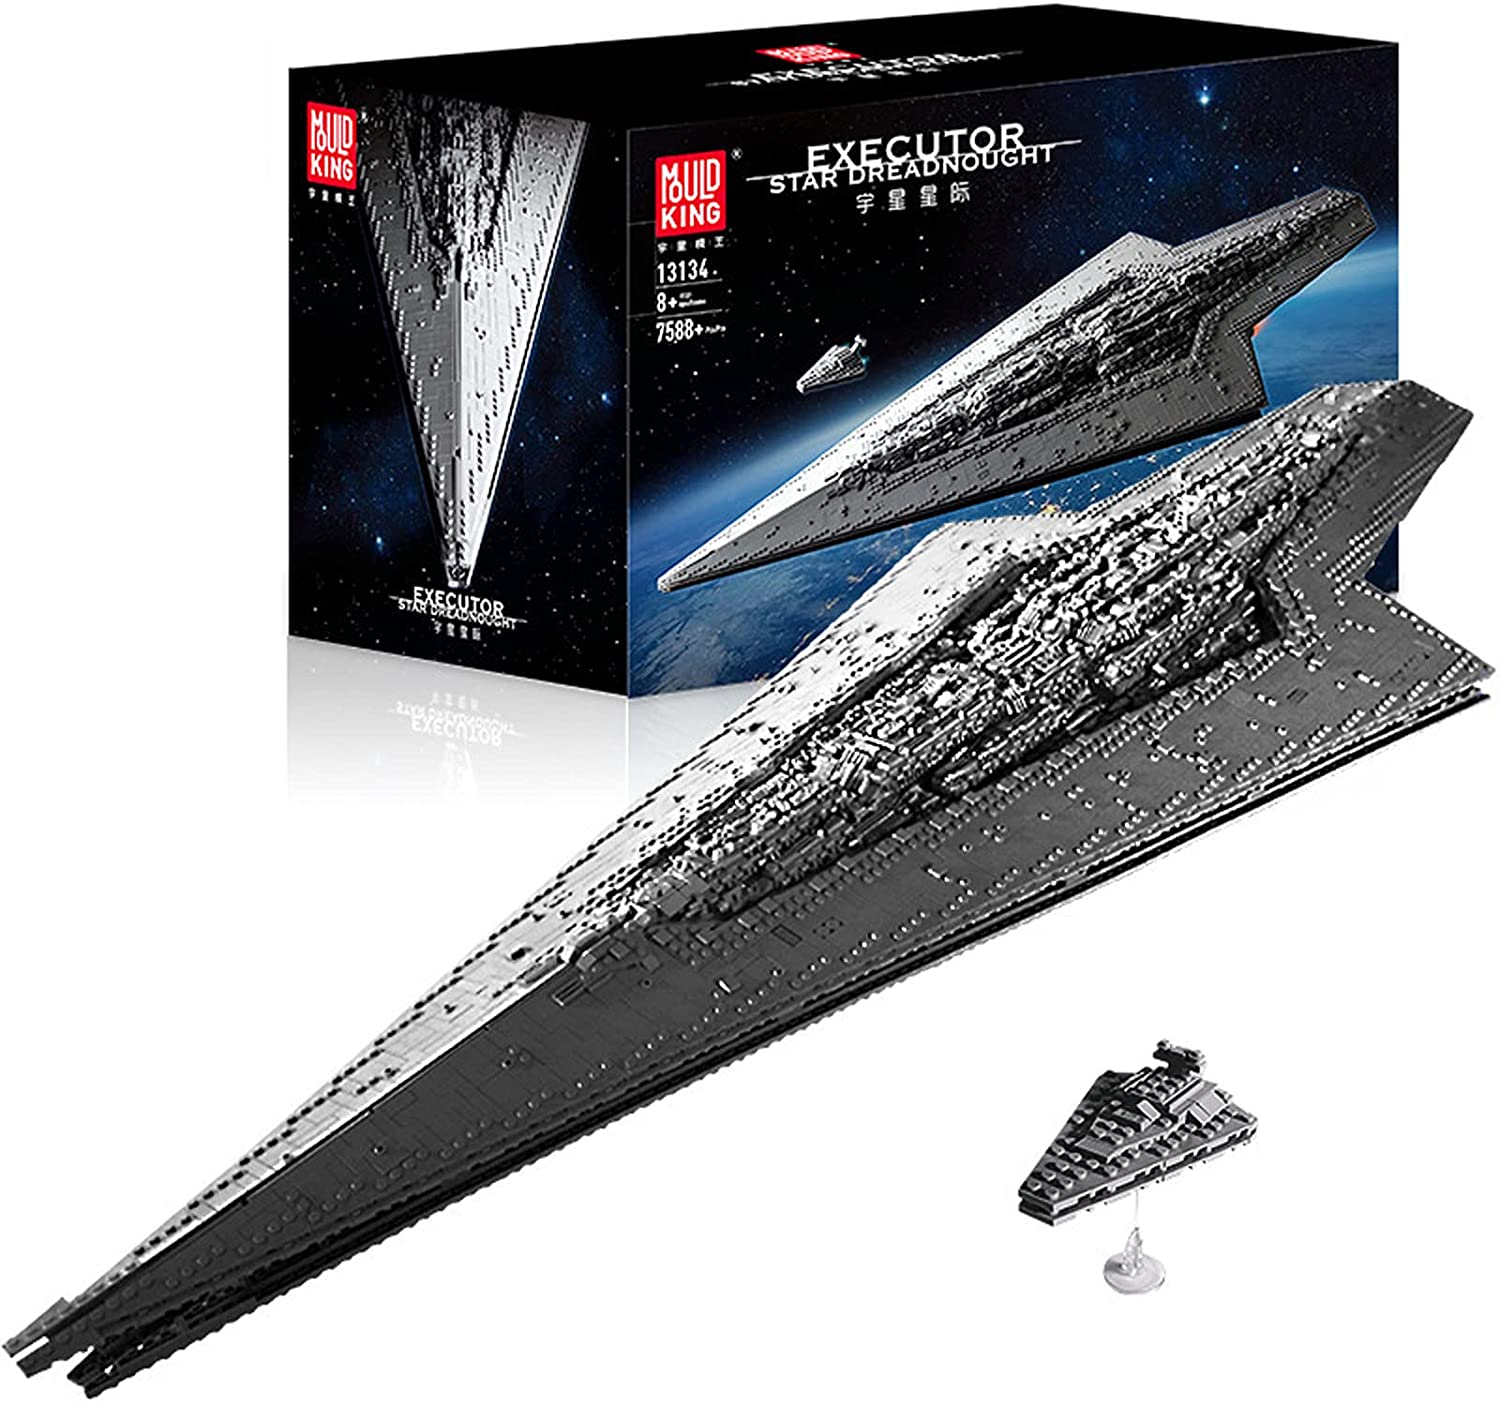 SW Executor Class Super Dreadnought Star Destroyer Lego Building Kit 1